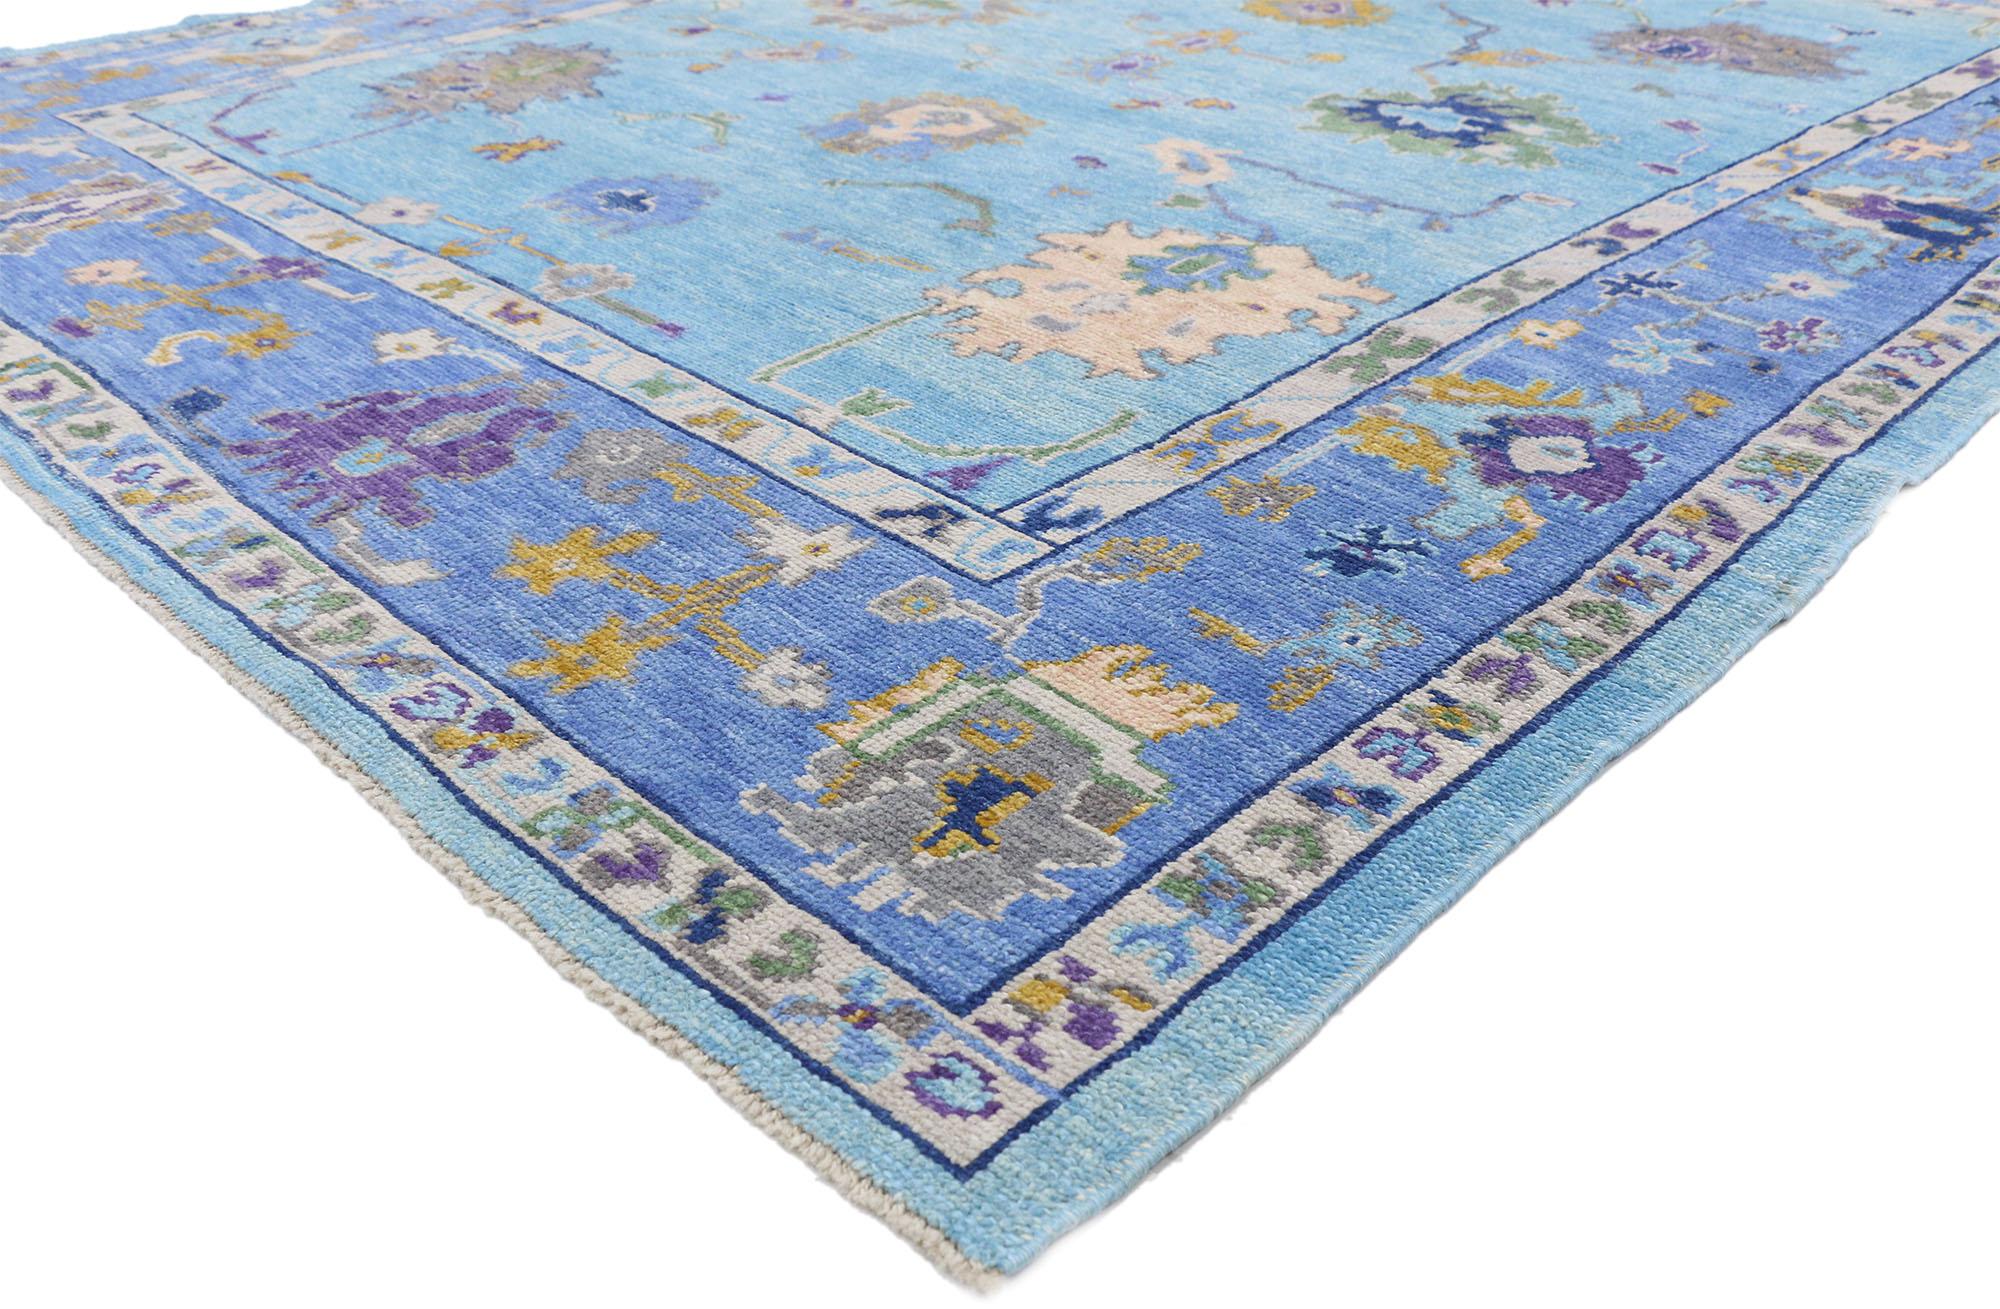 52428, new contemporary Turkish Oushak rug with modern colors and Expressionist style. This hand knotted wool contemporary Turkish Oushak rug features a vibrant all-over floral pattern spread across an abrashed sky blue field. Harshang palmettes,